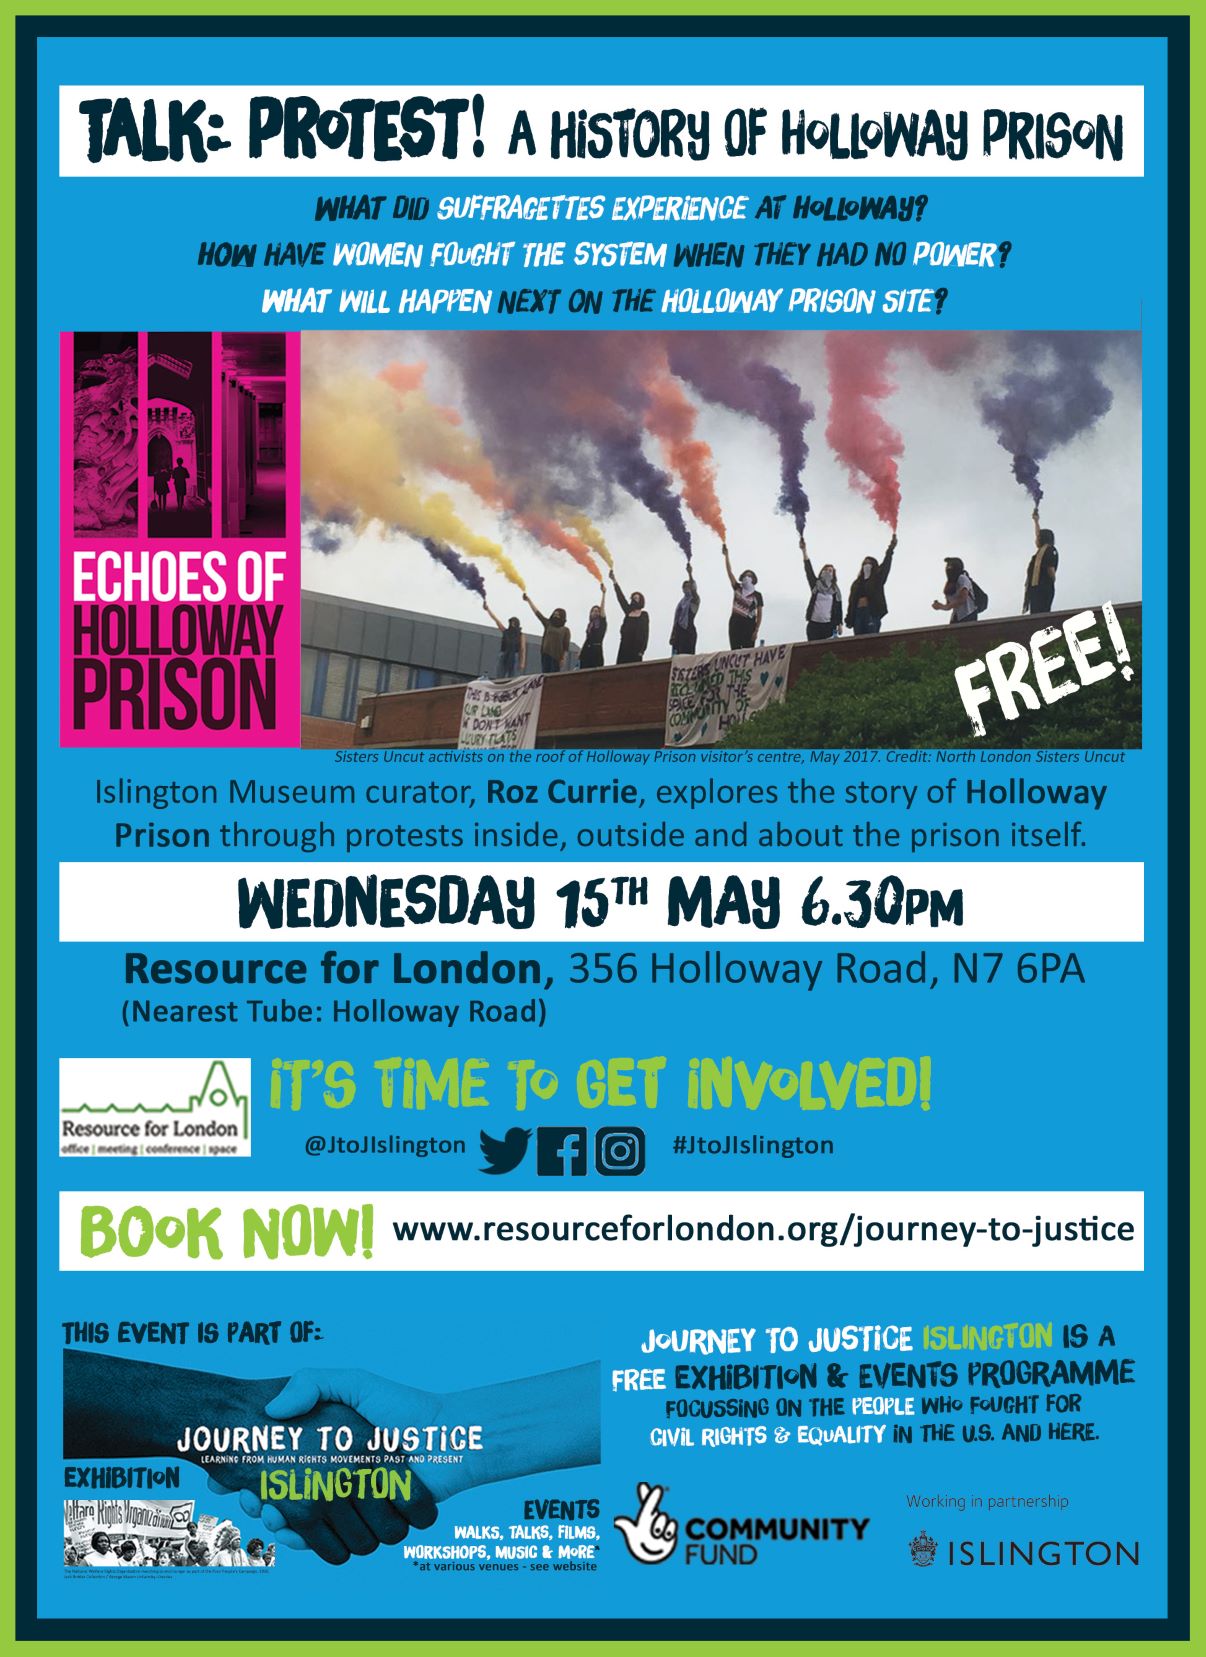 Talk Protest at Holloway Prison E-Flyer for Event on 15th May 2019